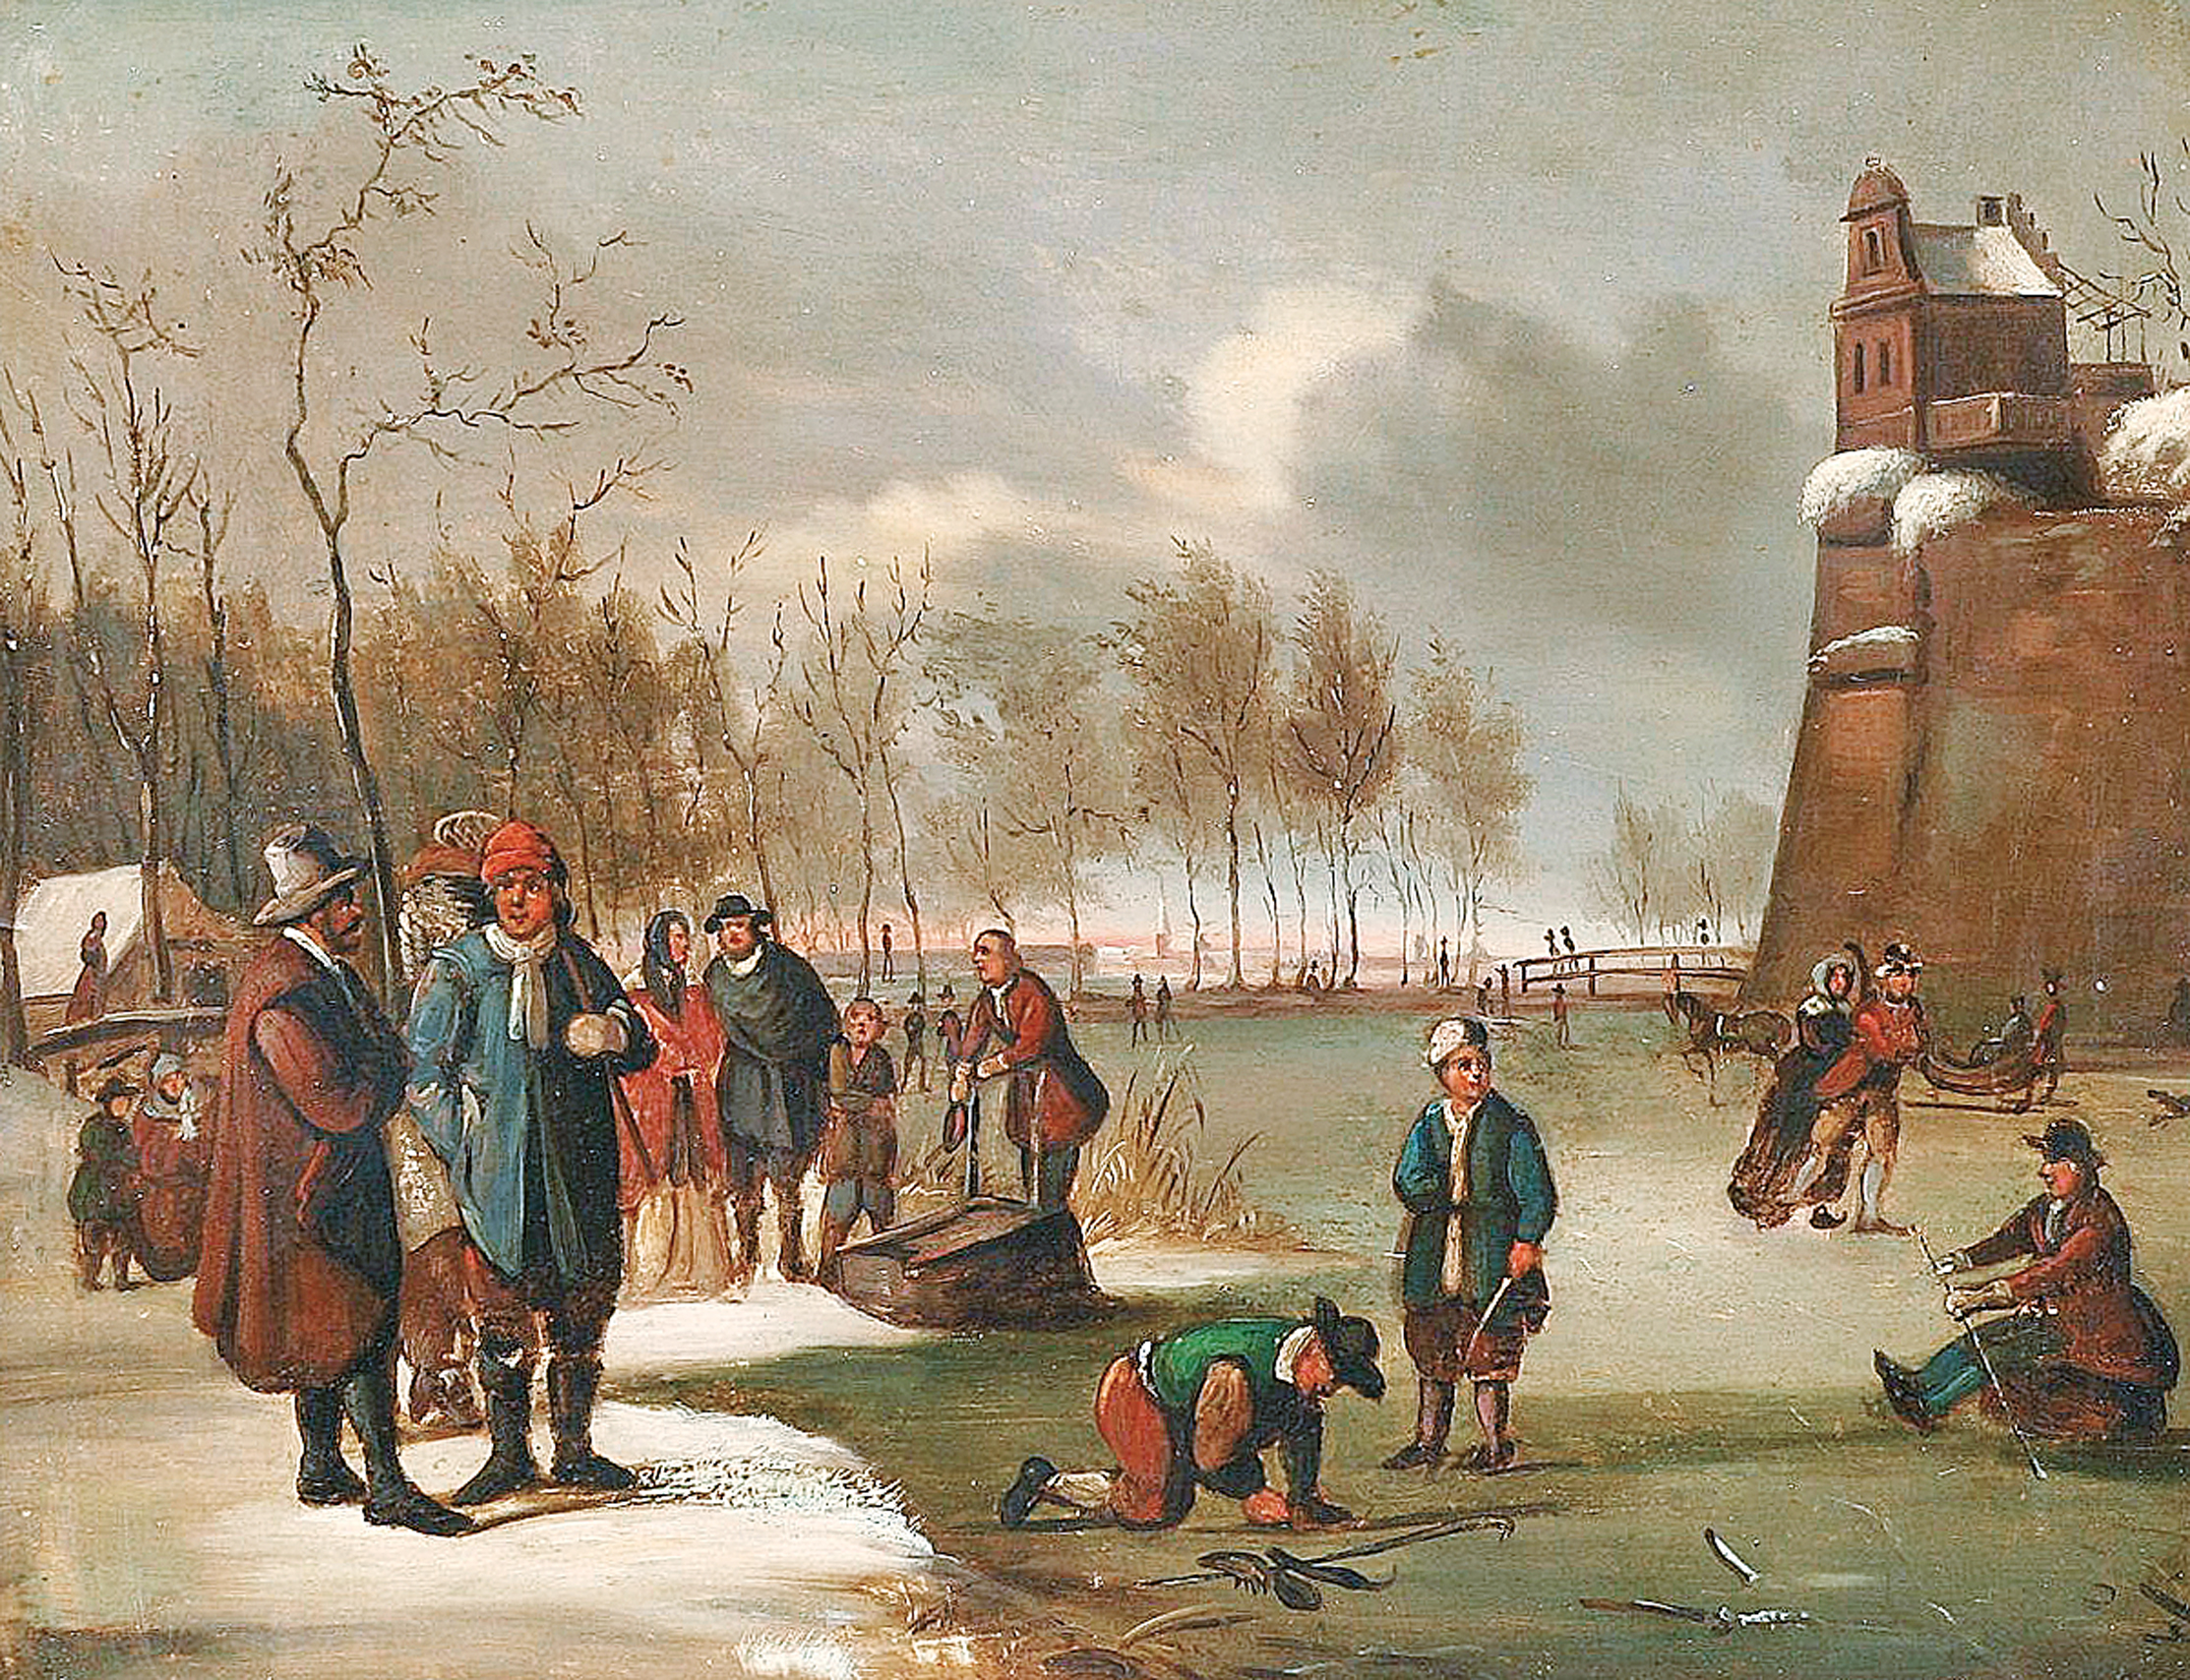 A landscape with people on ice near a fortification